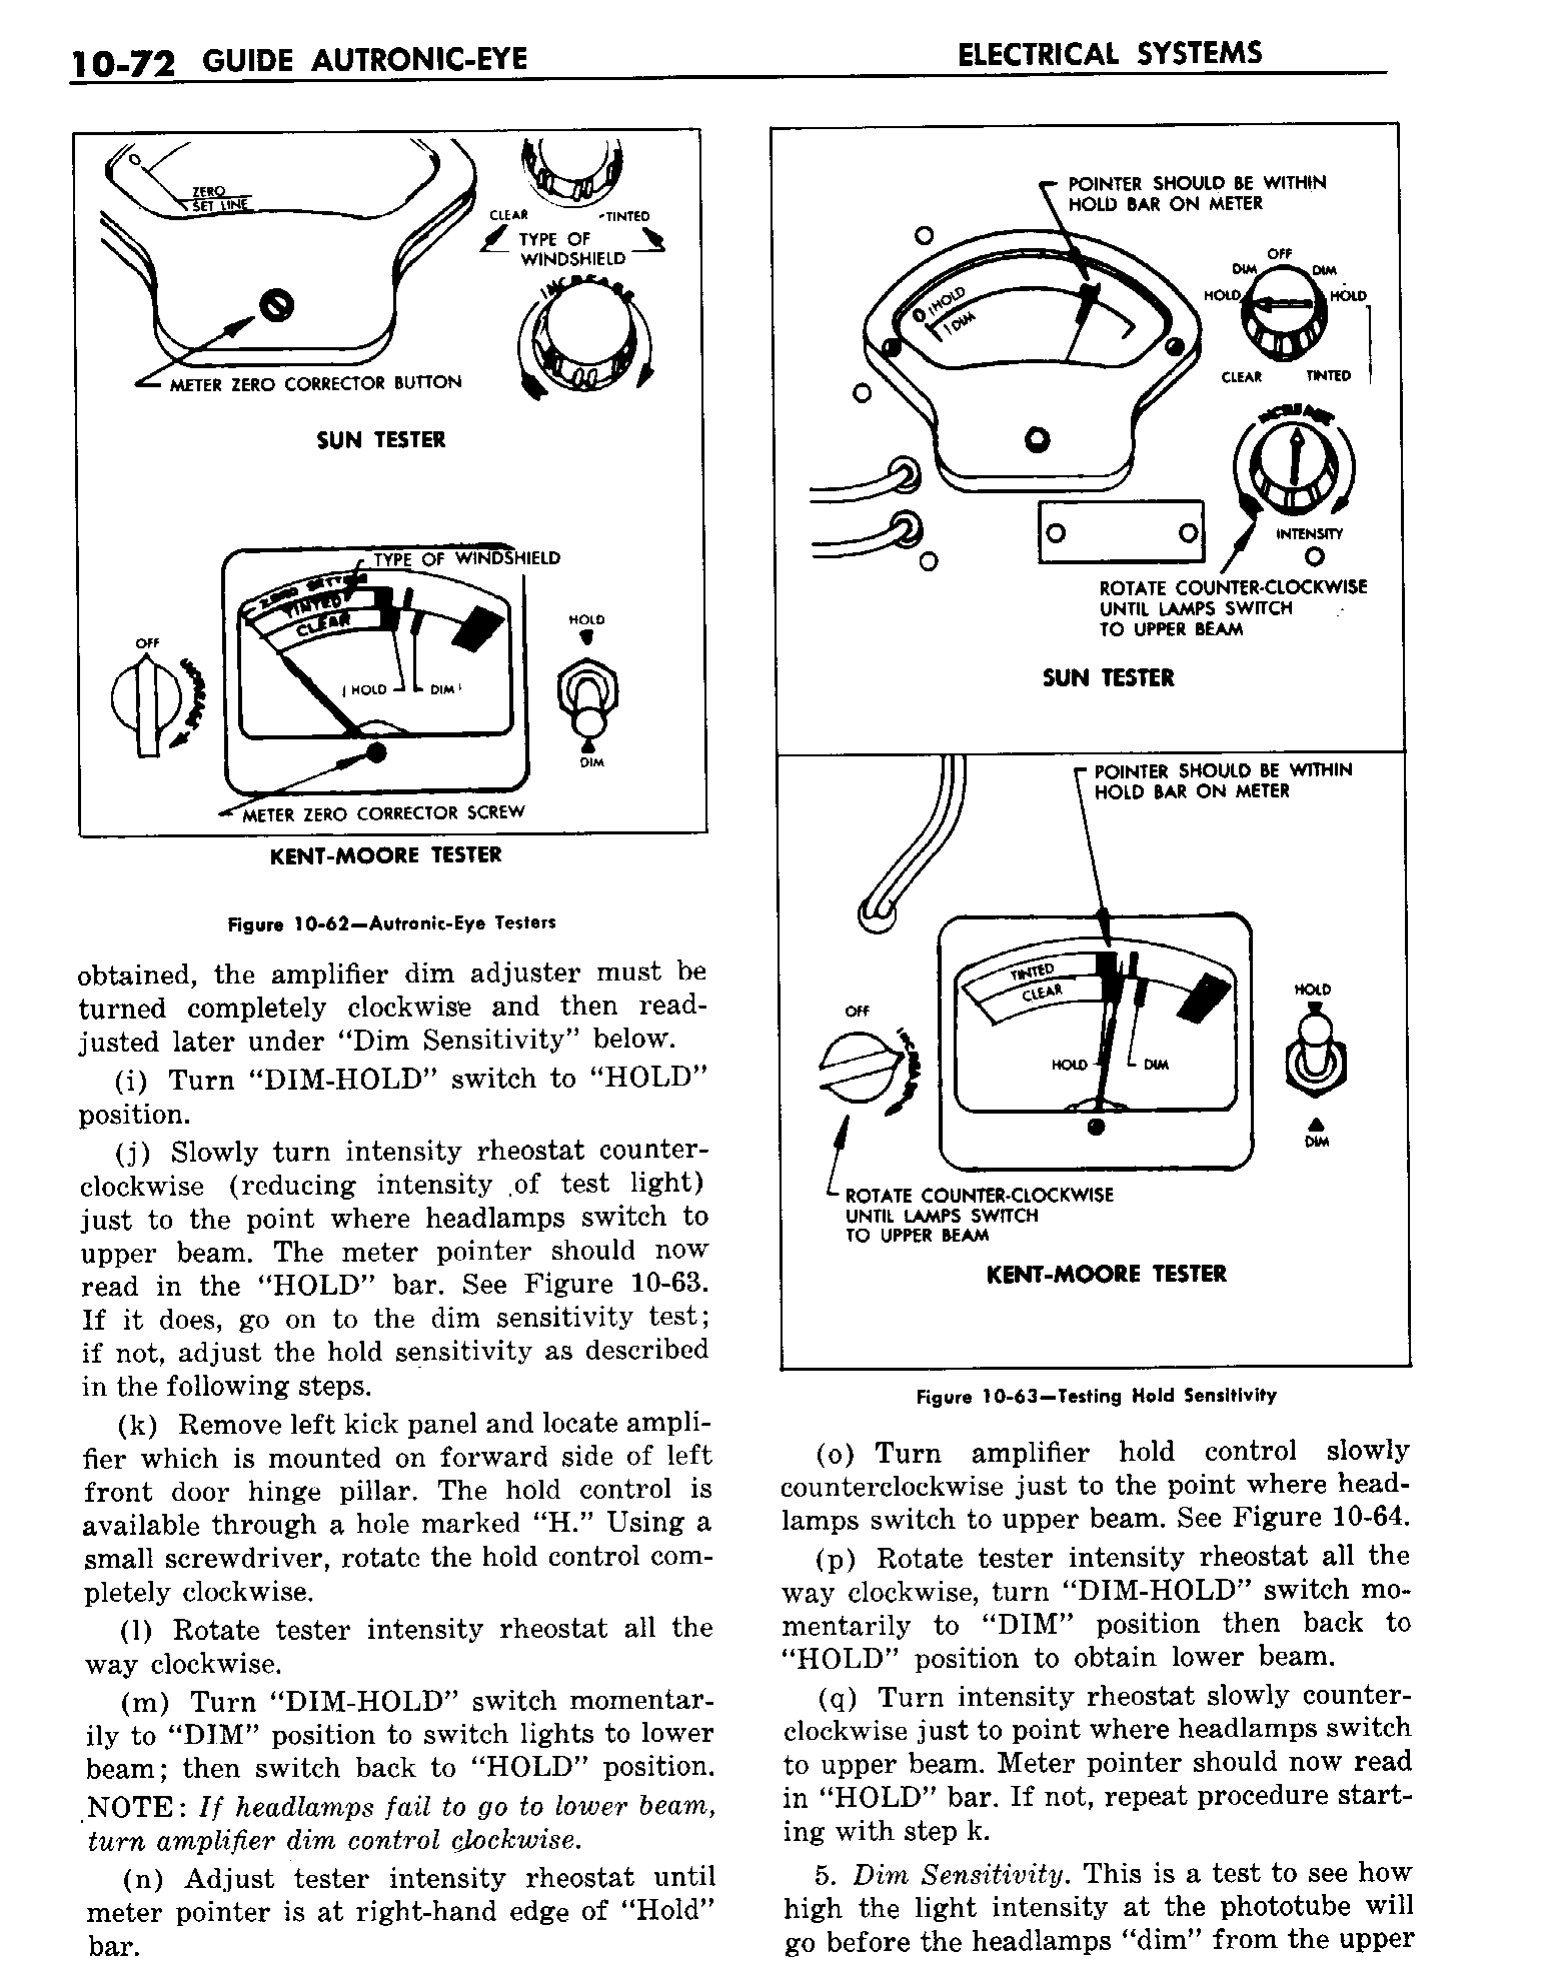 n_11 1958 Buick Shop Manual - Electrical Systems_72.jpg